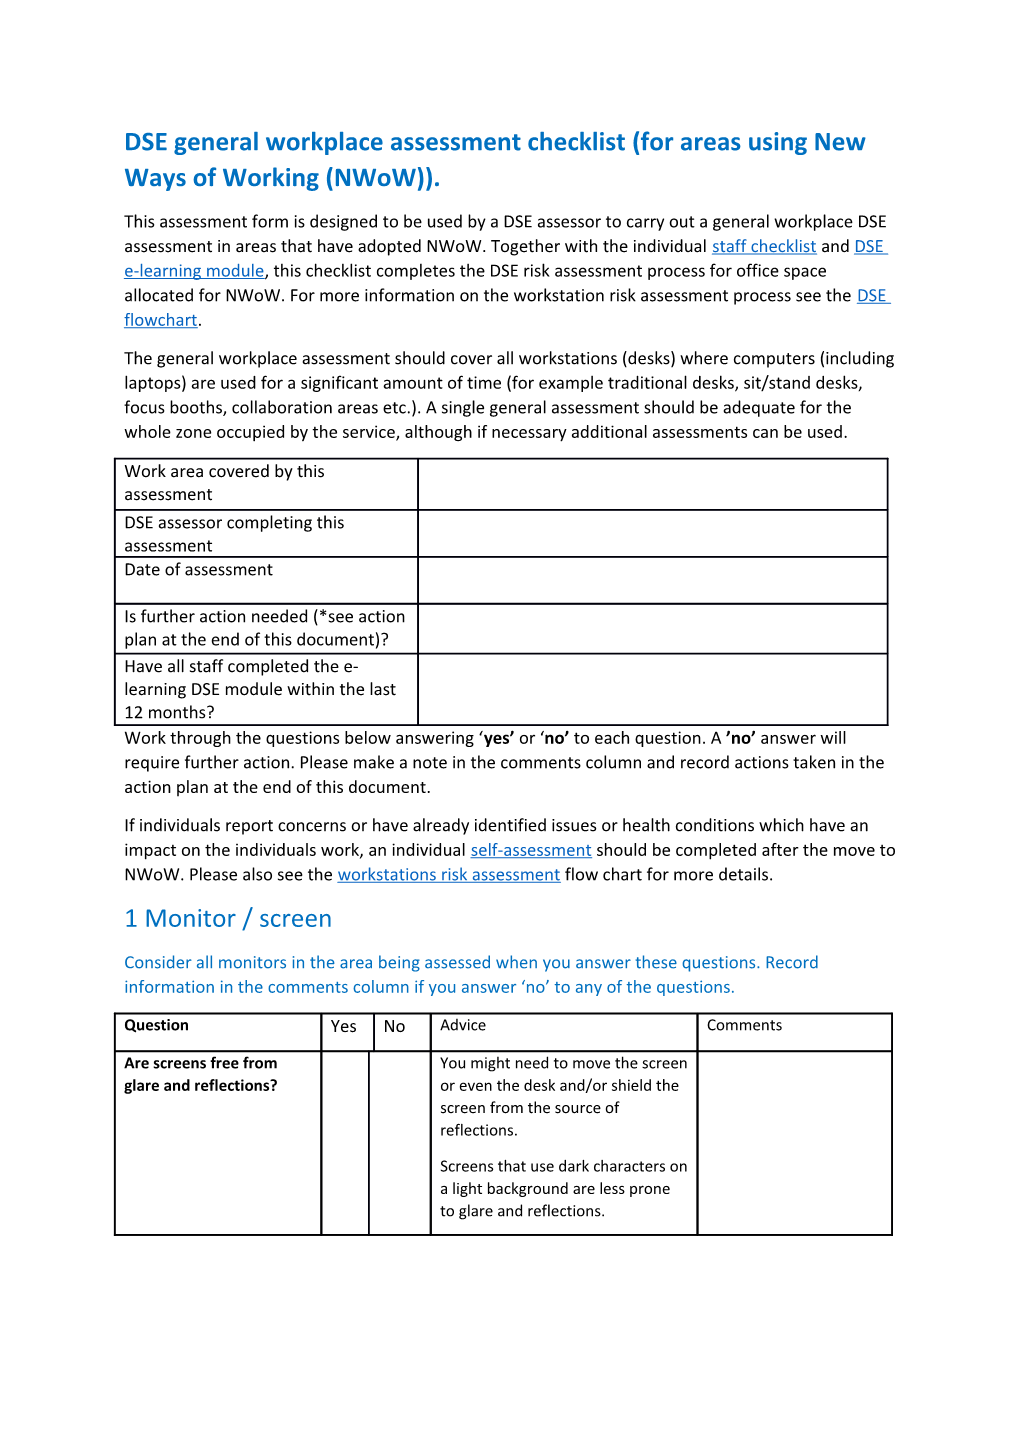 DSE General Workplace Assessment Checklist (For Areas Using New Ways of Working (Nwow))